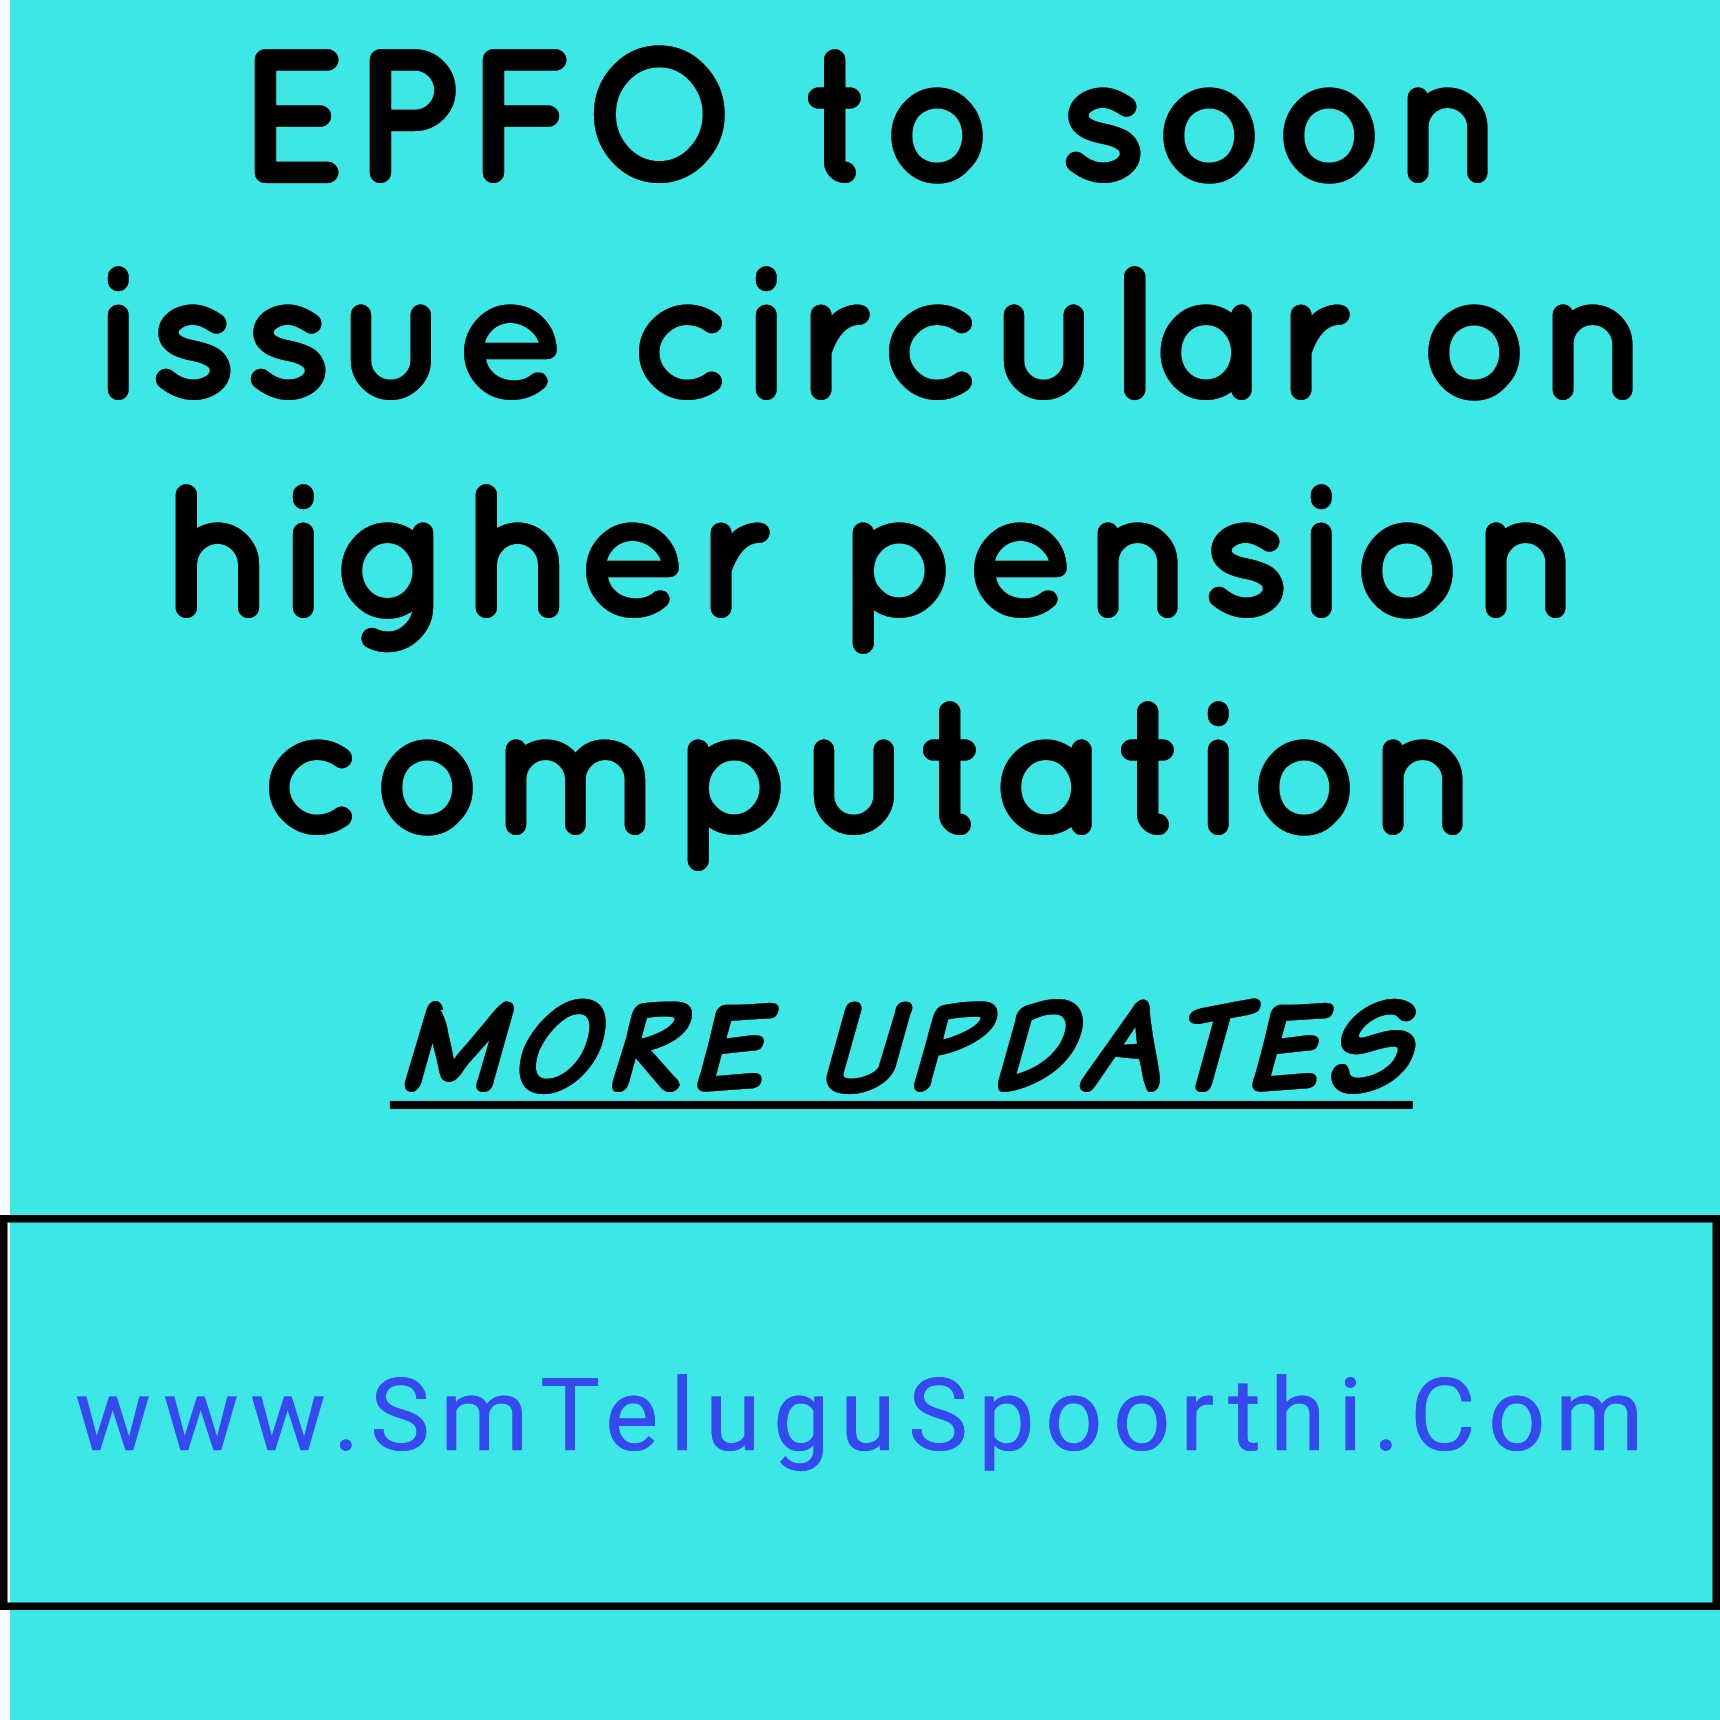 EPFO to soon issue circular on higher pension computation